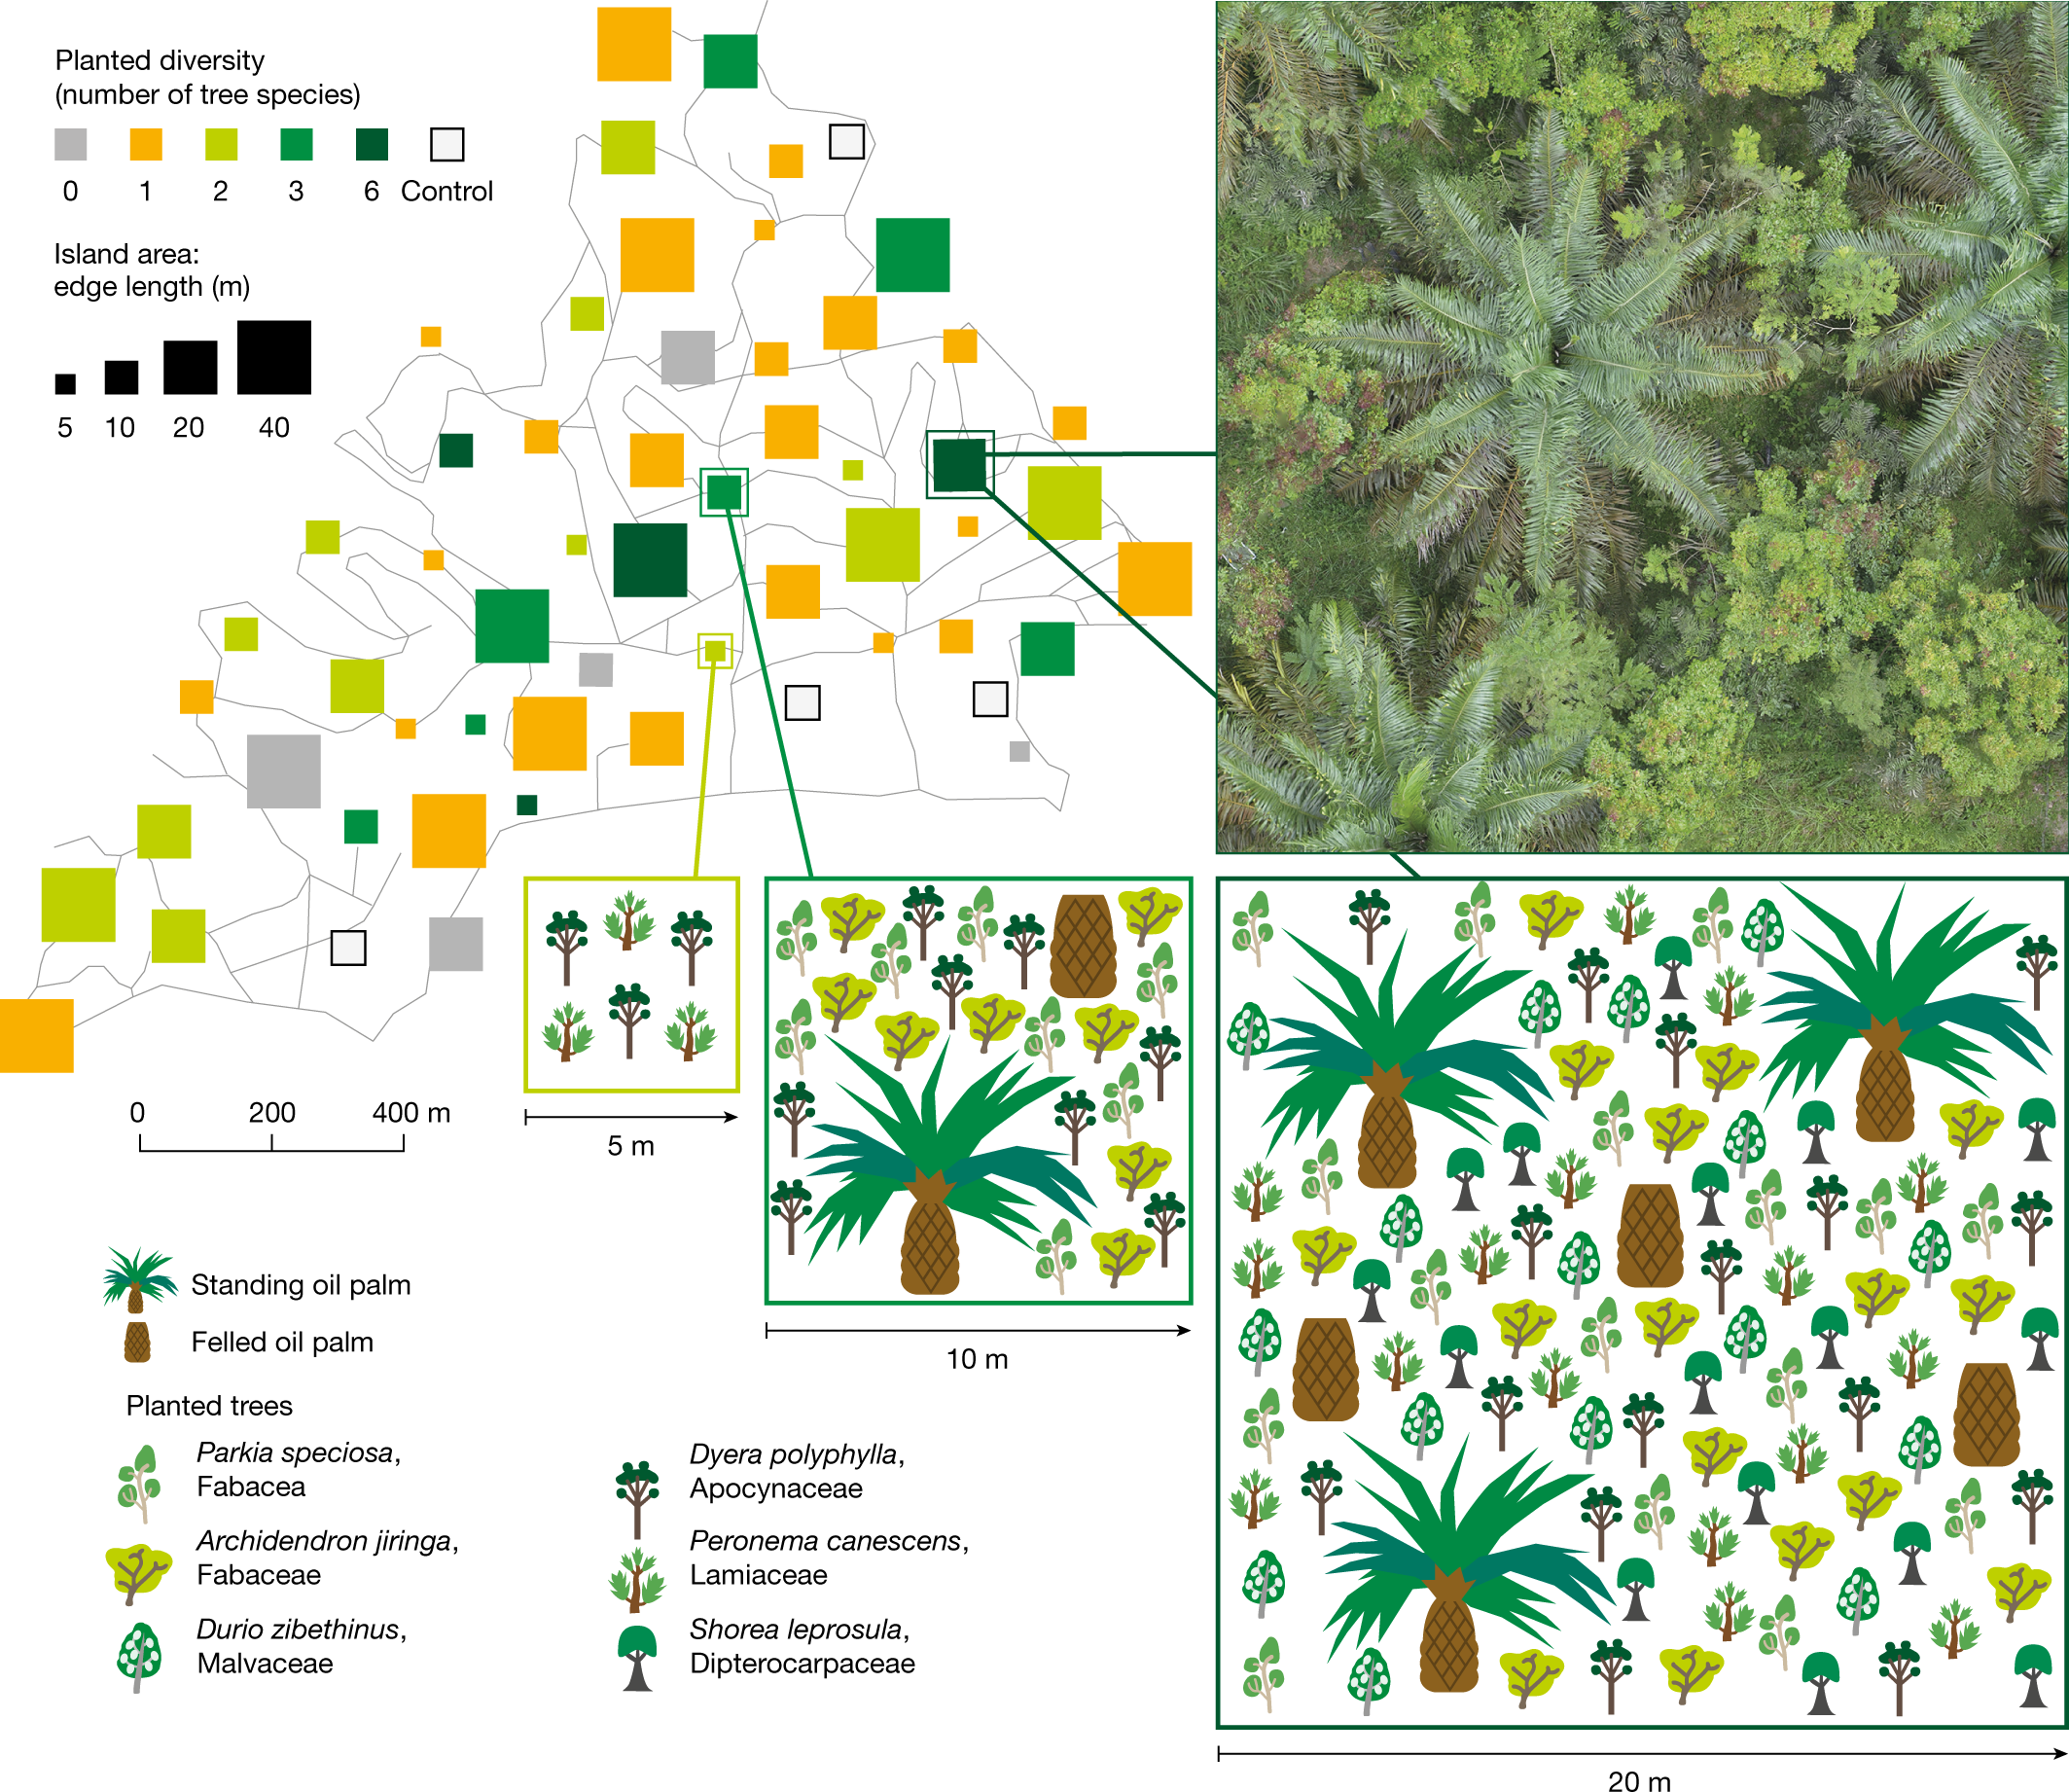 Tree islands enhance biodiversity and functioning in oil palm landscapes |  Nature